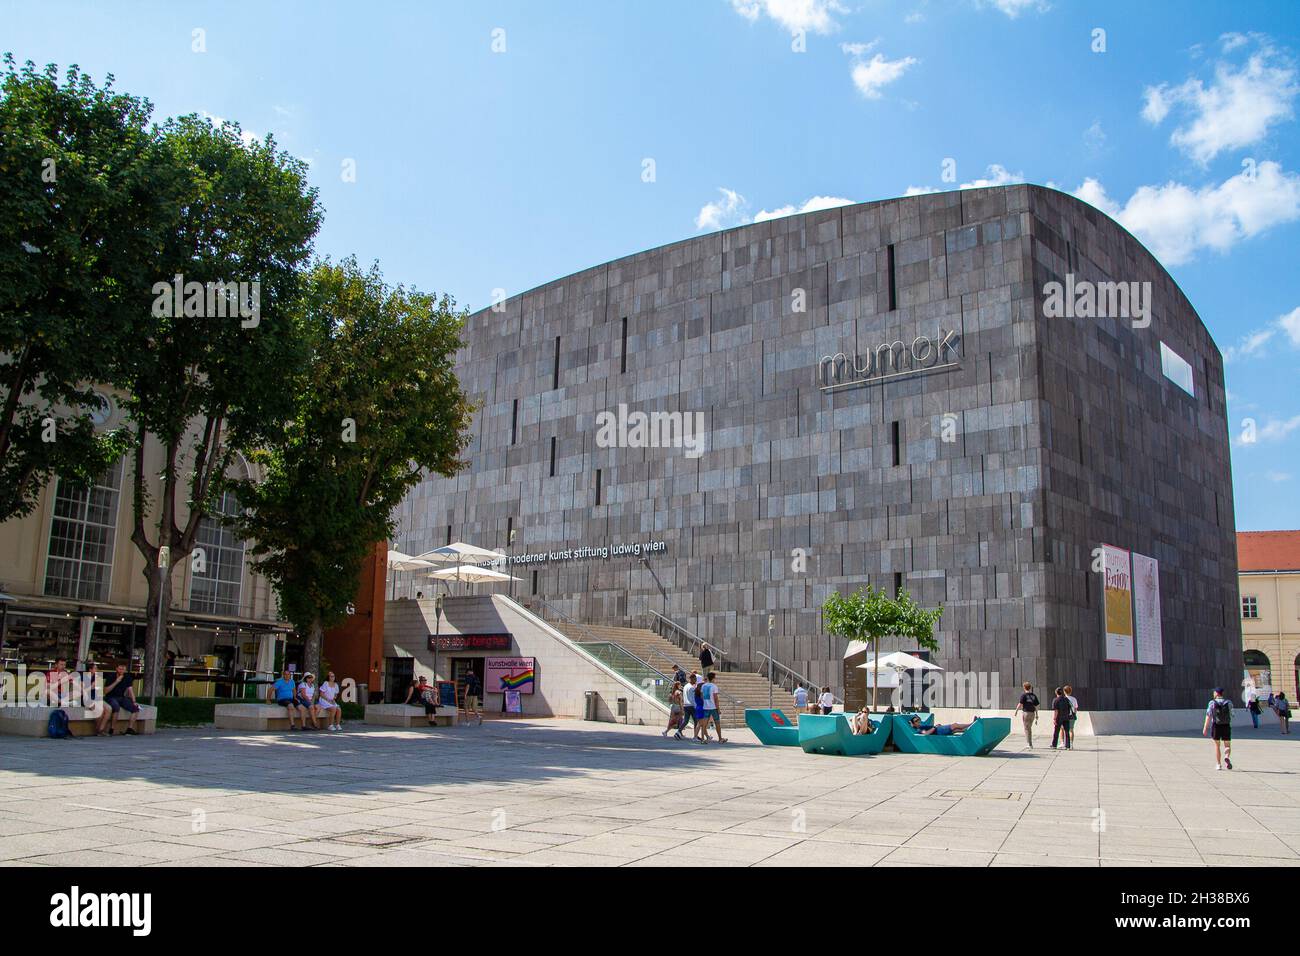 Vienna, Austria, July 13, 2021. The MuseumsQuartier Wien, MQ, is a cultural complex, housed in the former imperial stables. It is one of the largest c Stock Photo